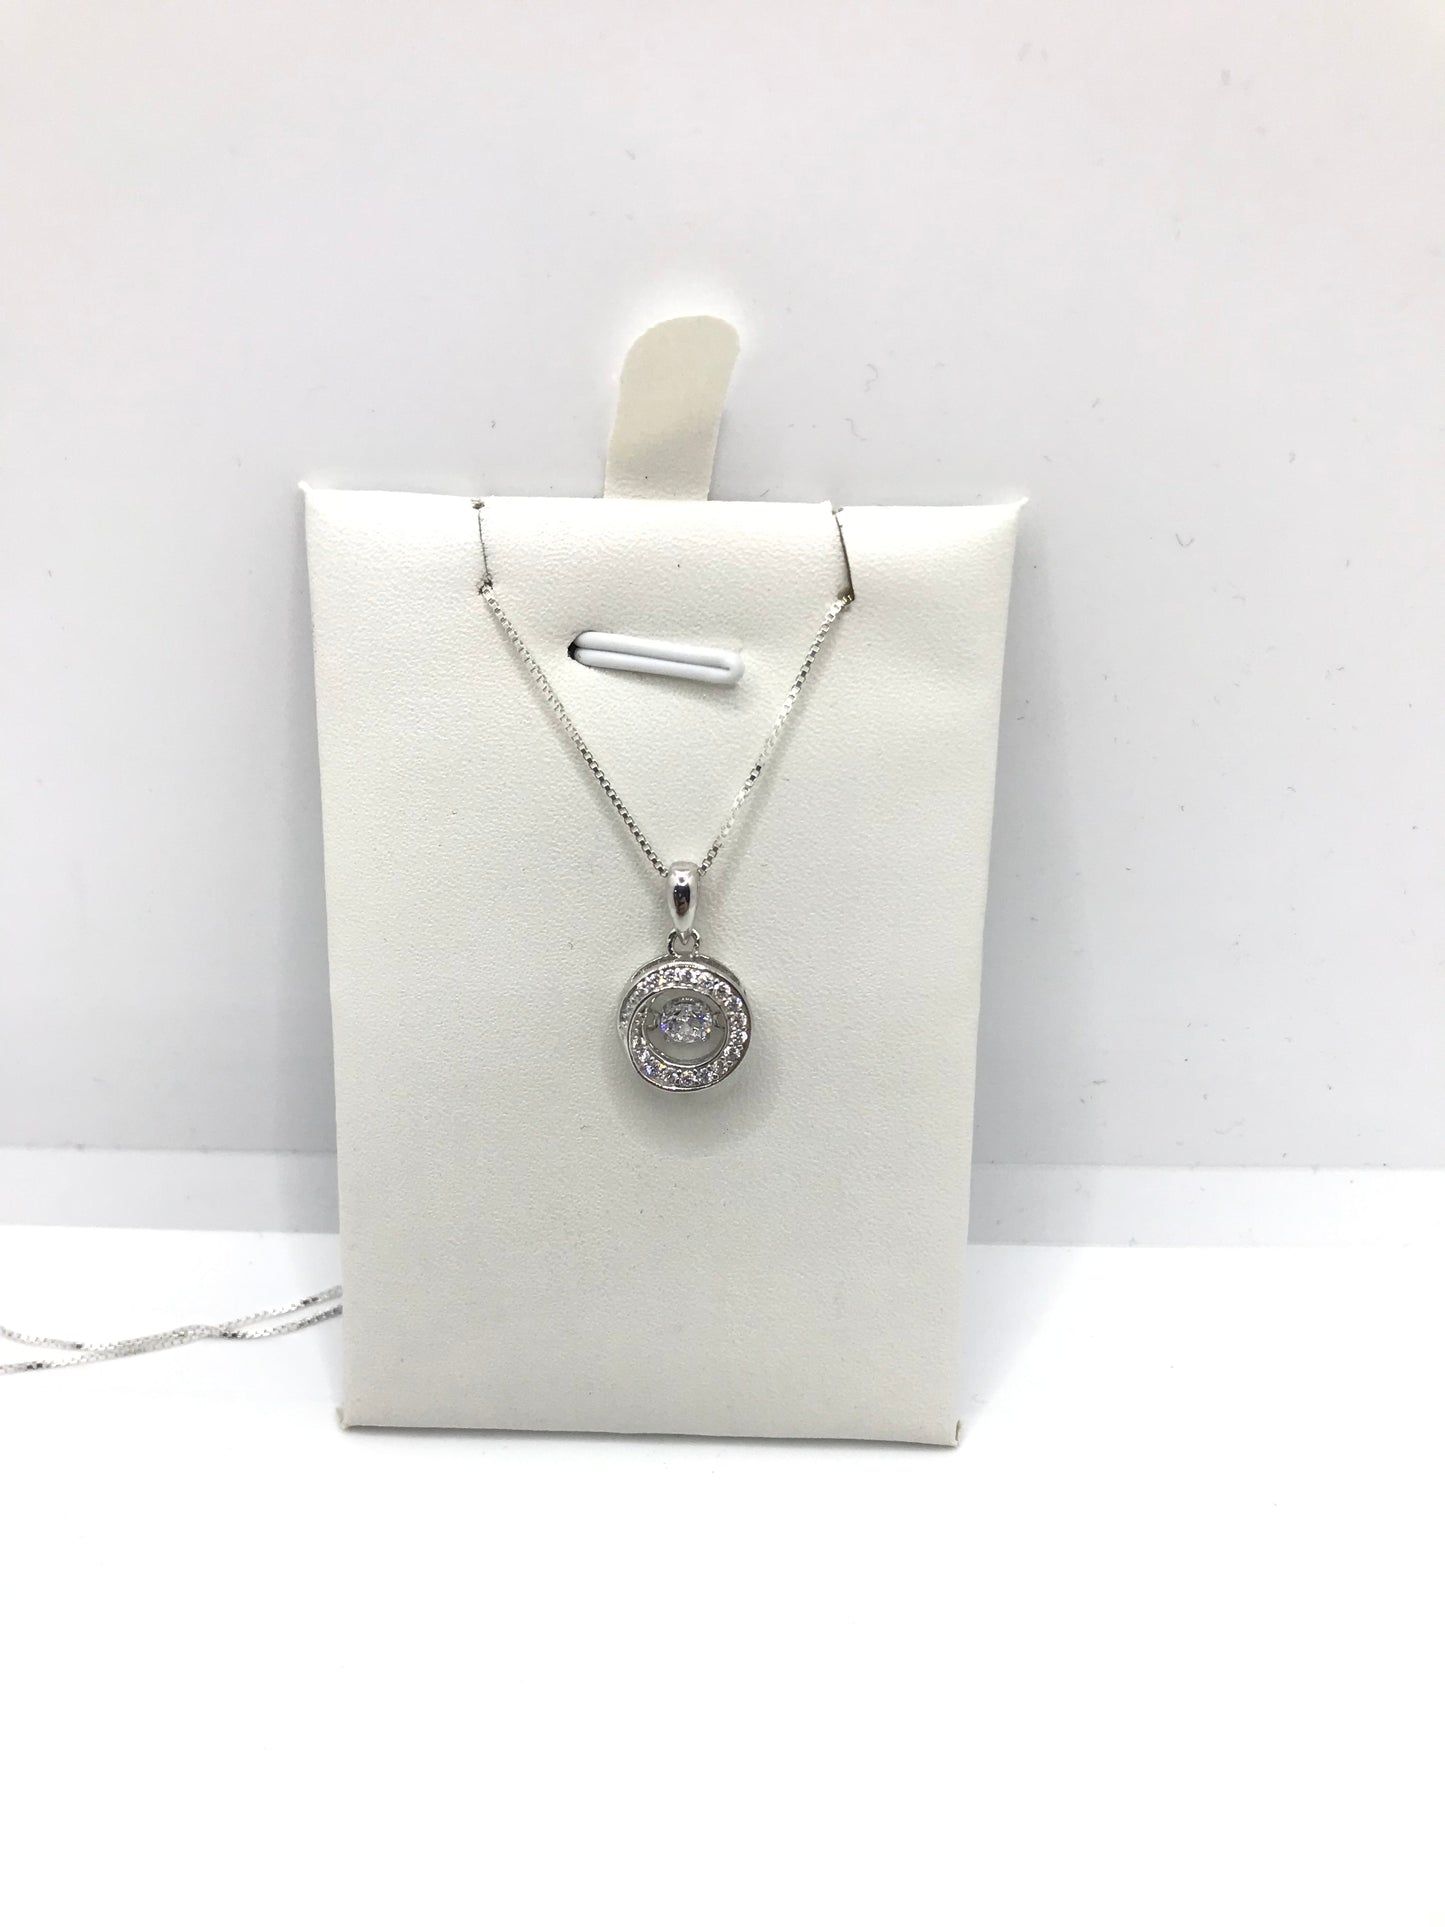 Real silver dancing stone necklace